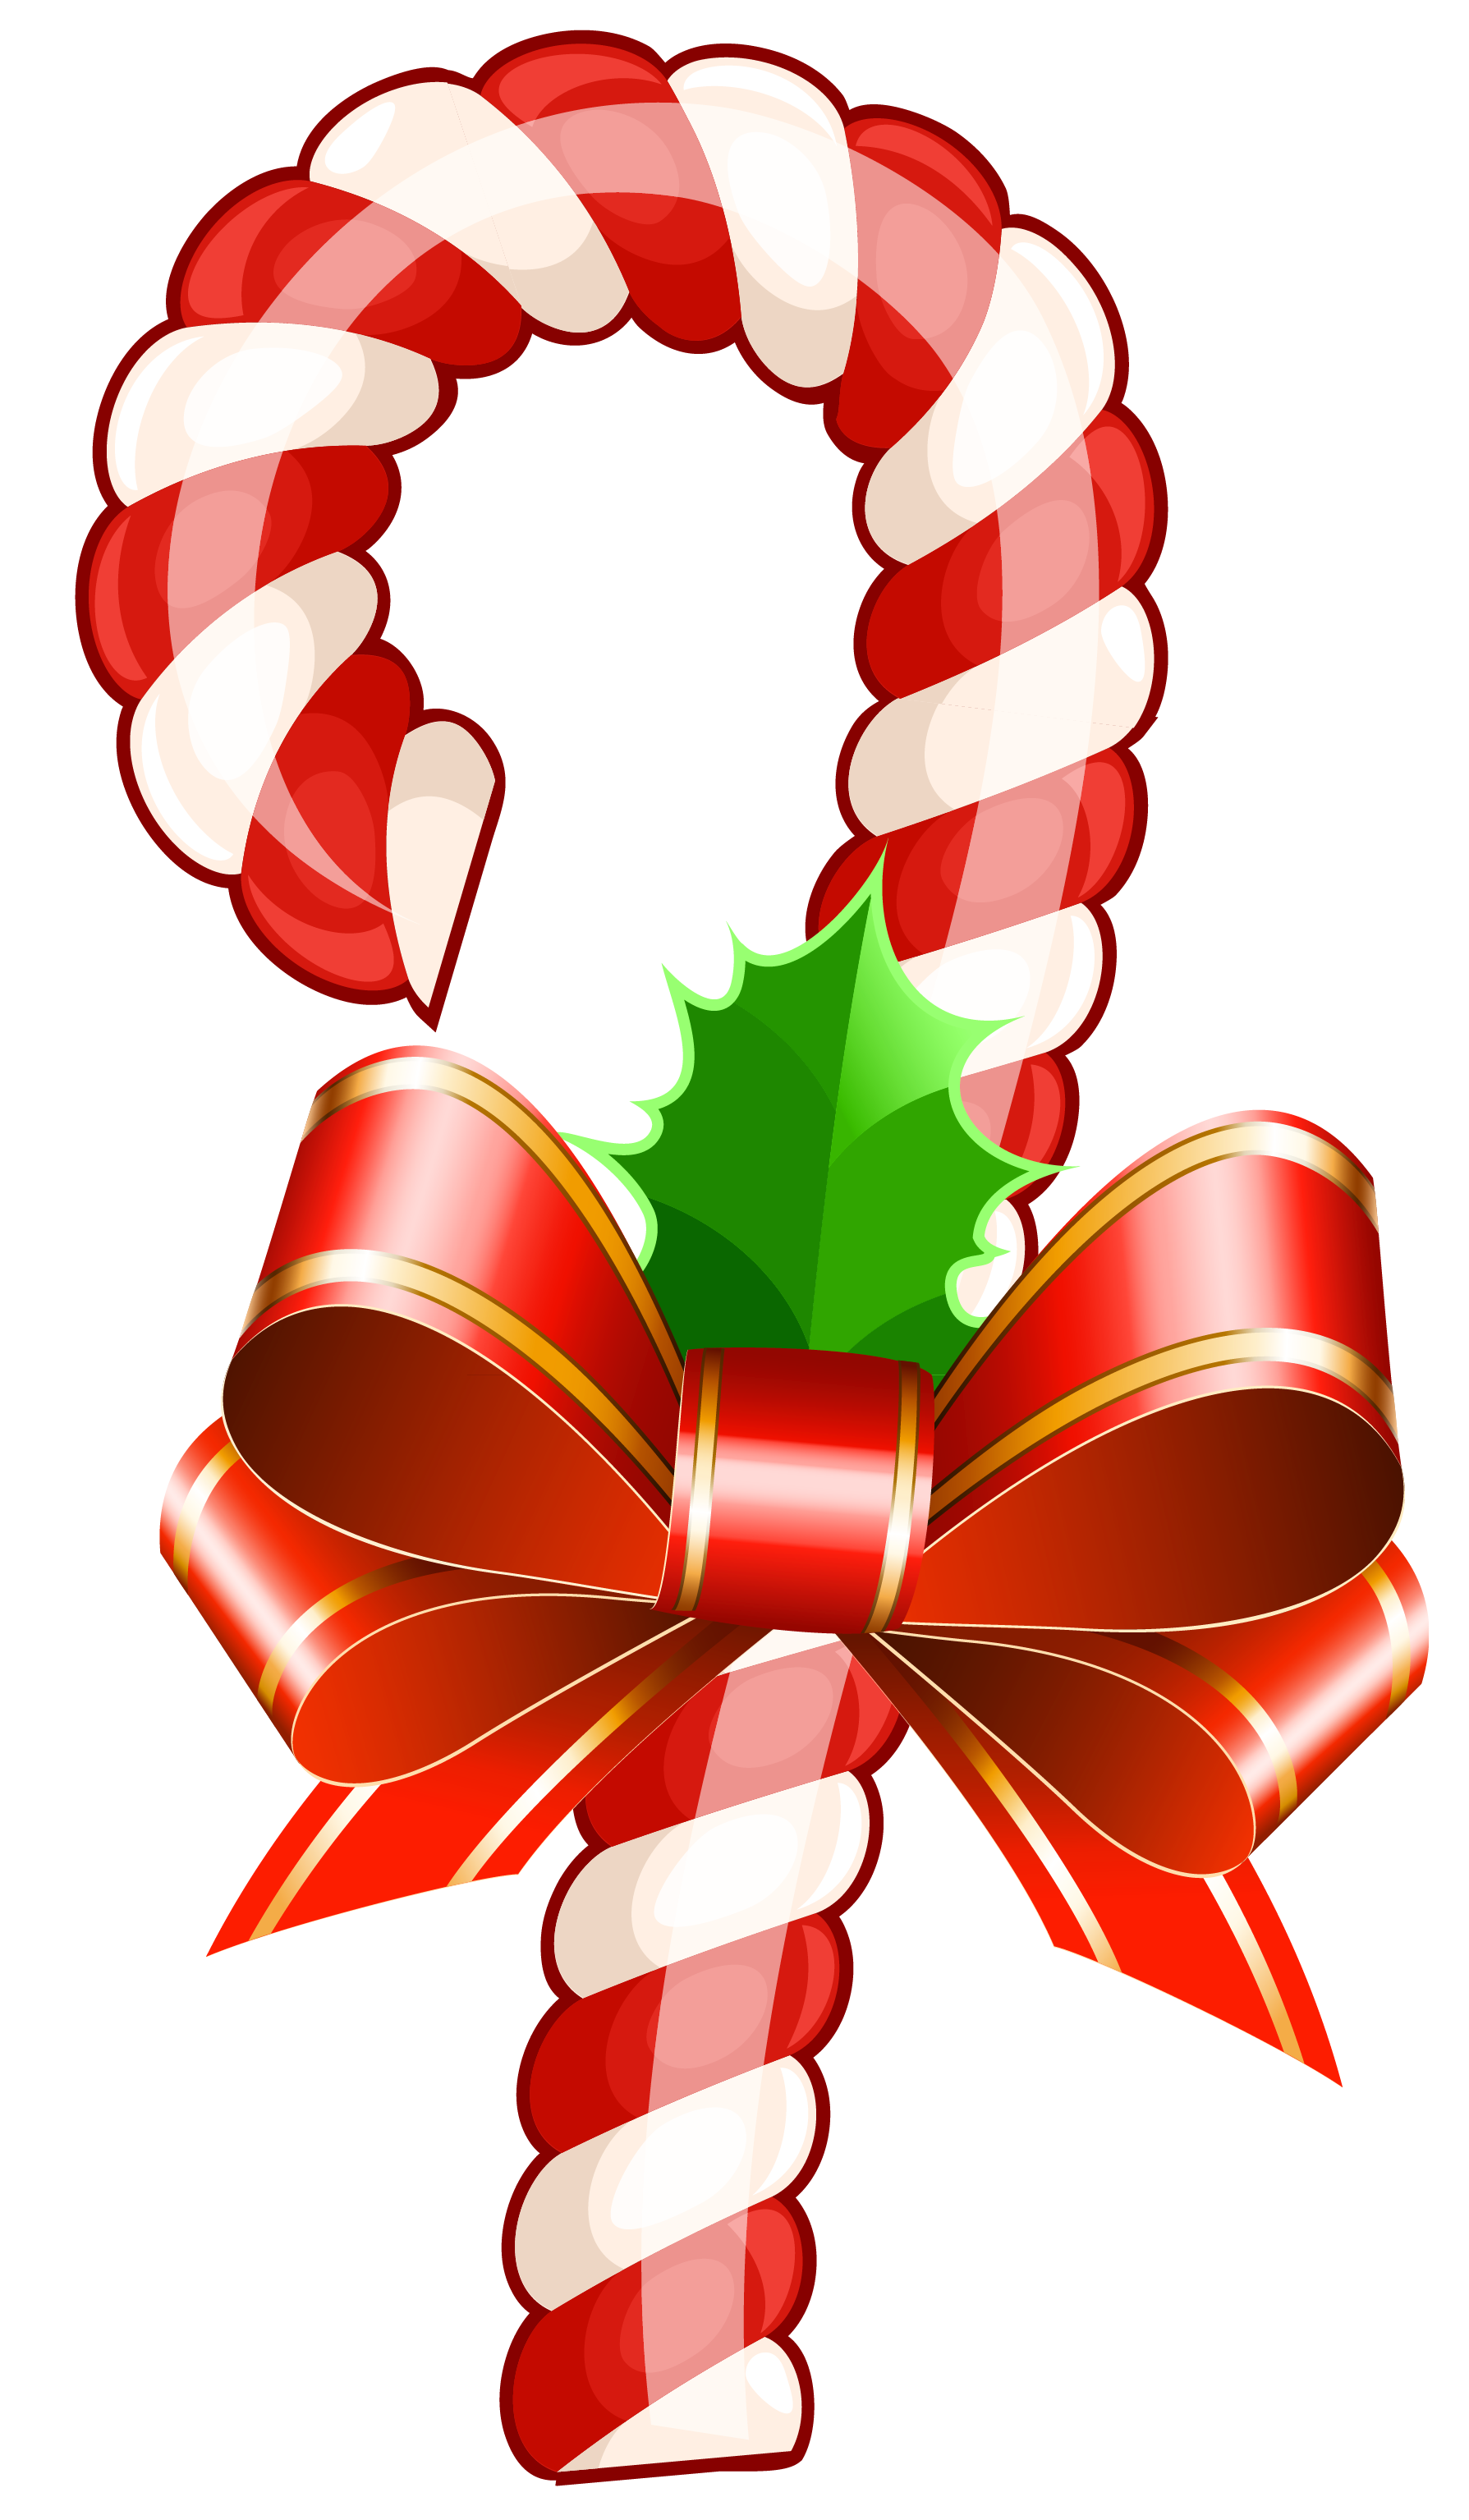 Candy cane clip art candy cane factscandy cane facts 3 image